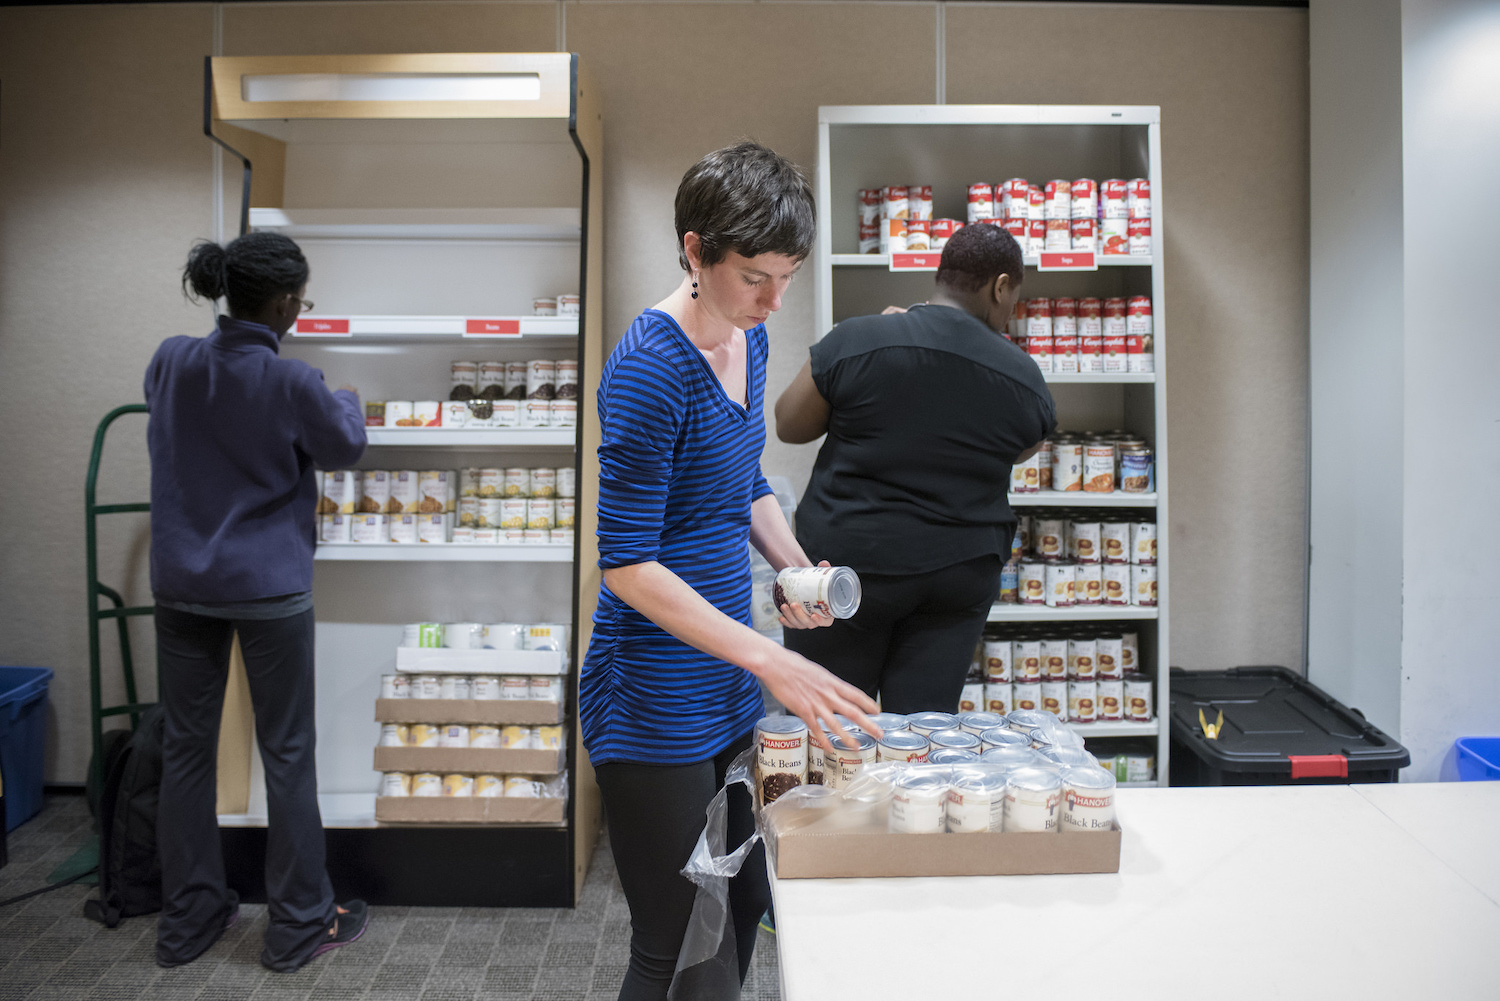 Ohio food pantries are struggling with a funding crunch and increasing clients. Credit: Bread of the World, November 2018